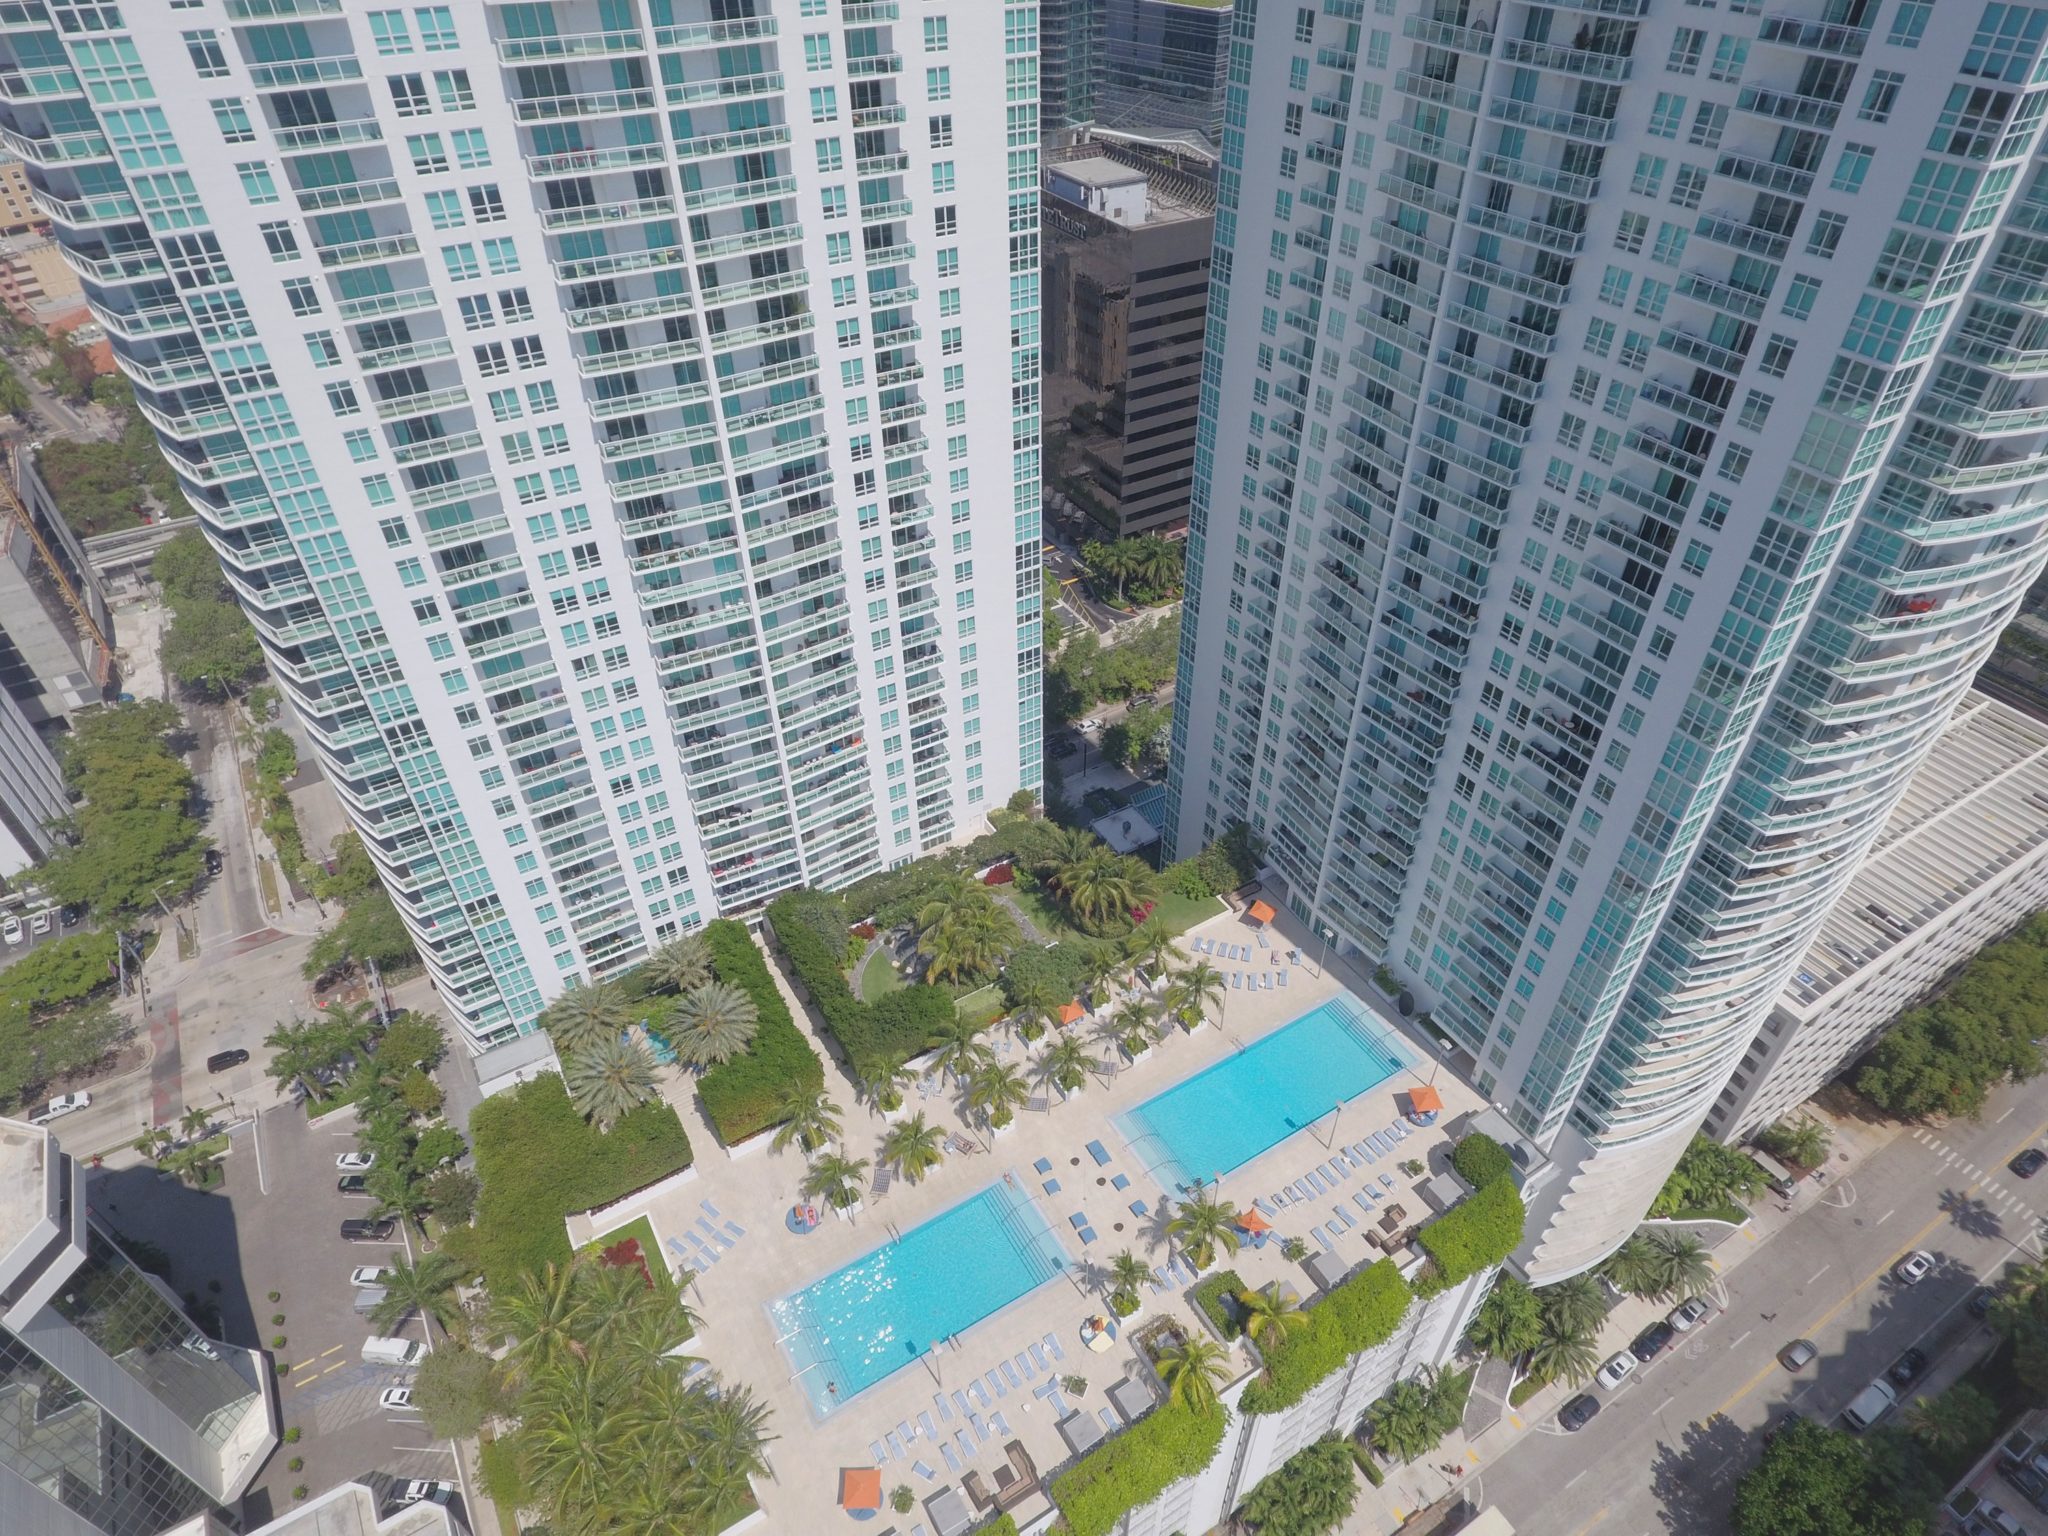 The Plaza on Brickell - Benefits Of Buying A Luxury Condo In Brickell’s Exclusive